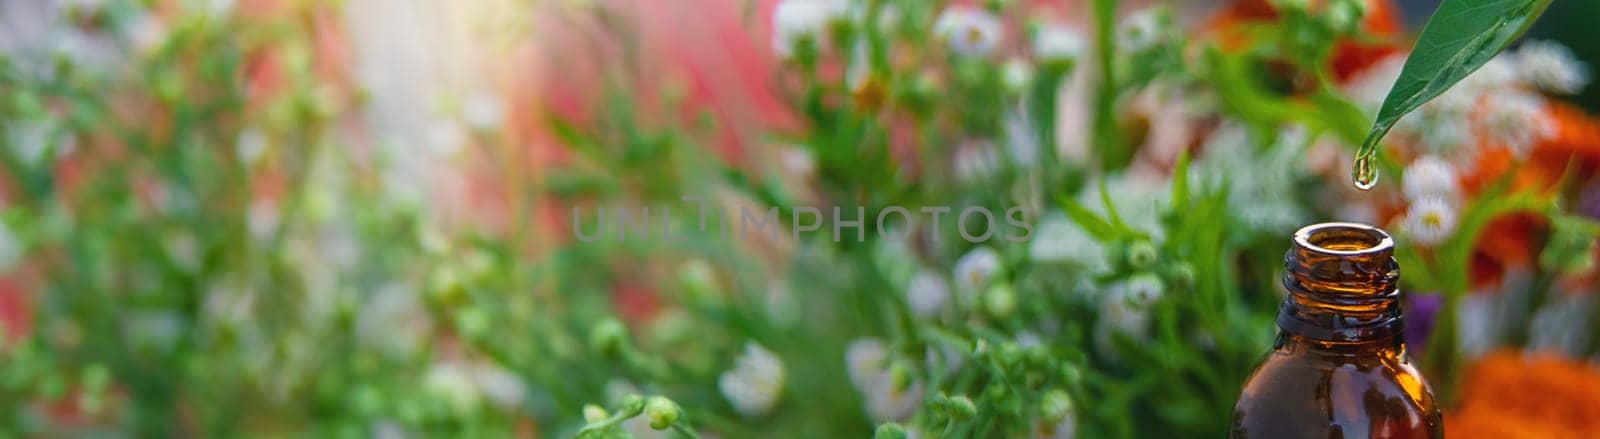 Essential oil of flowers and herbs drop. Selective focus. Nature.